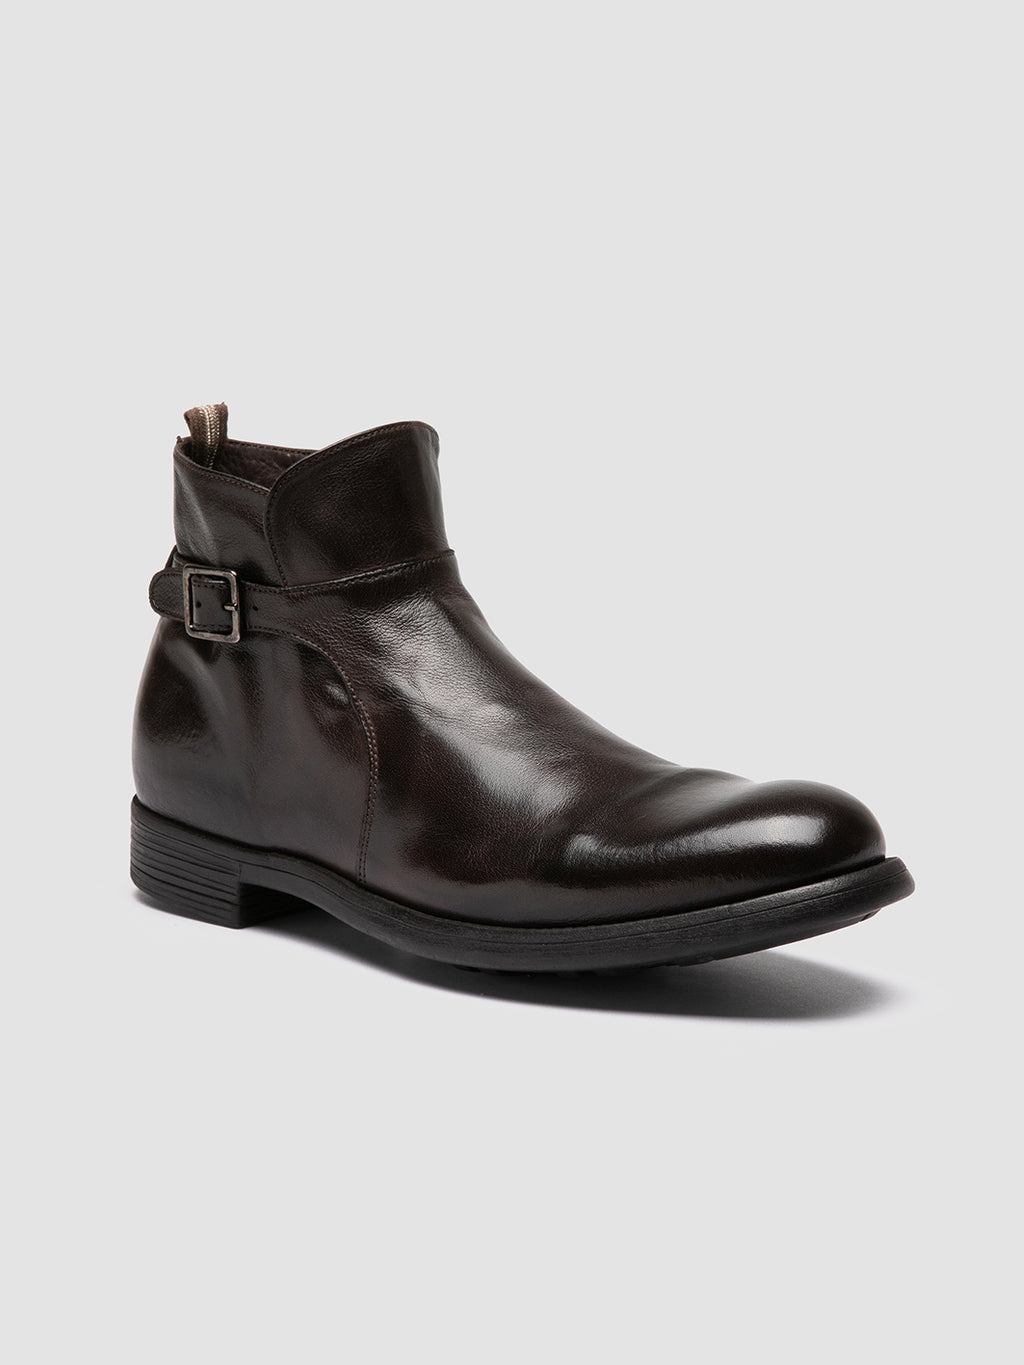 CHRONICLE 068 - Brown Leather Zipped Boots Men Officine Creative - 3